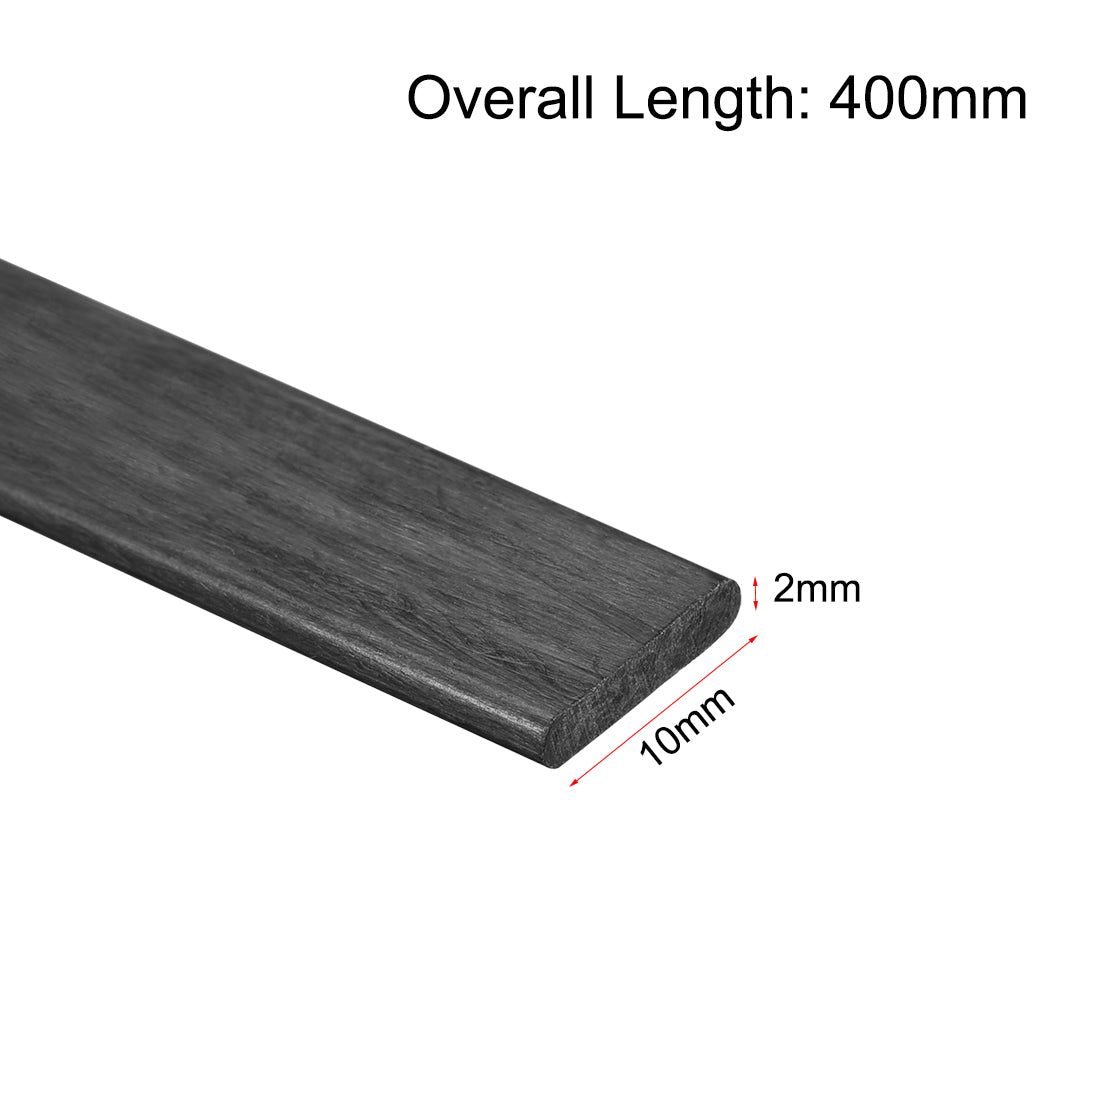 uxcell Uxcell Carbon Fiber Strip Bars 2x10mm 400mm Length Pultruded Carbon Fiber Strips for Kites, RC Airplane 2 Pcs